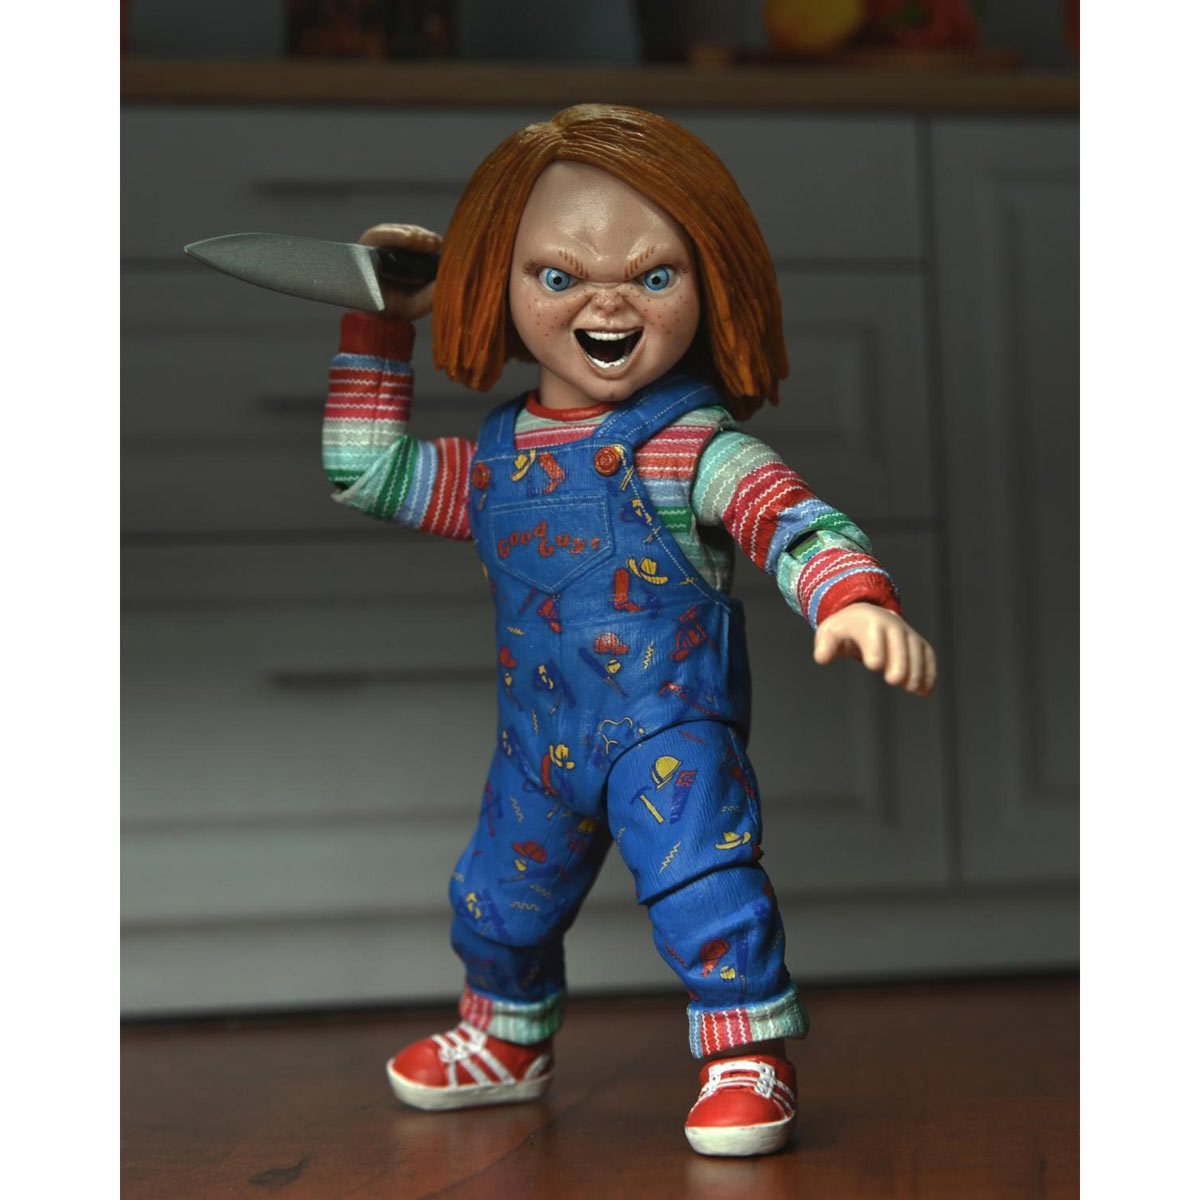 NECA - Chucky TV Series Ultimate Chucky 7-Inch Scale Action Figure